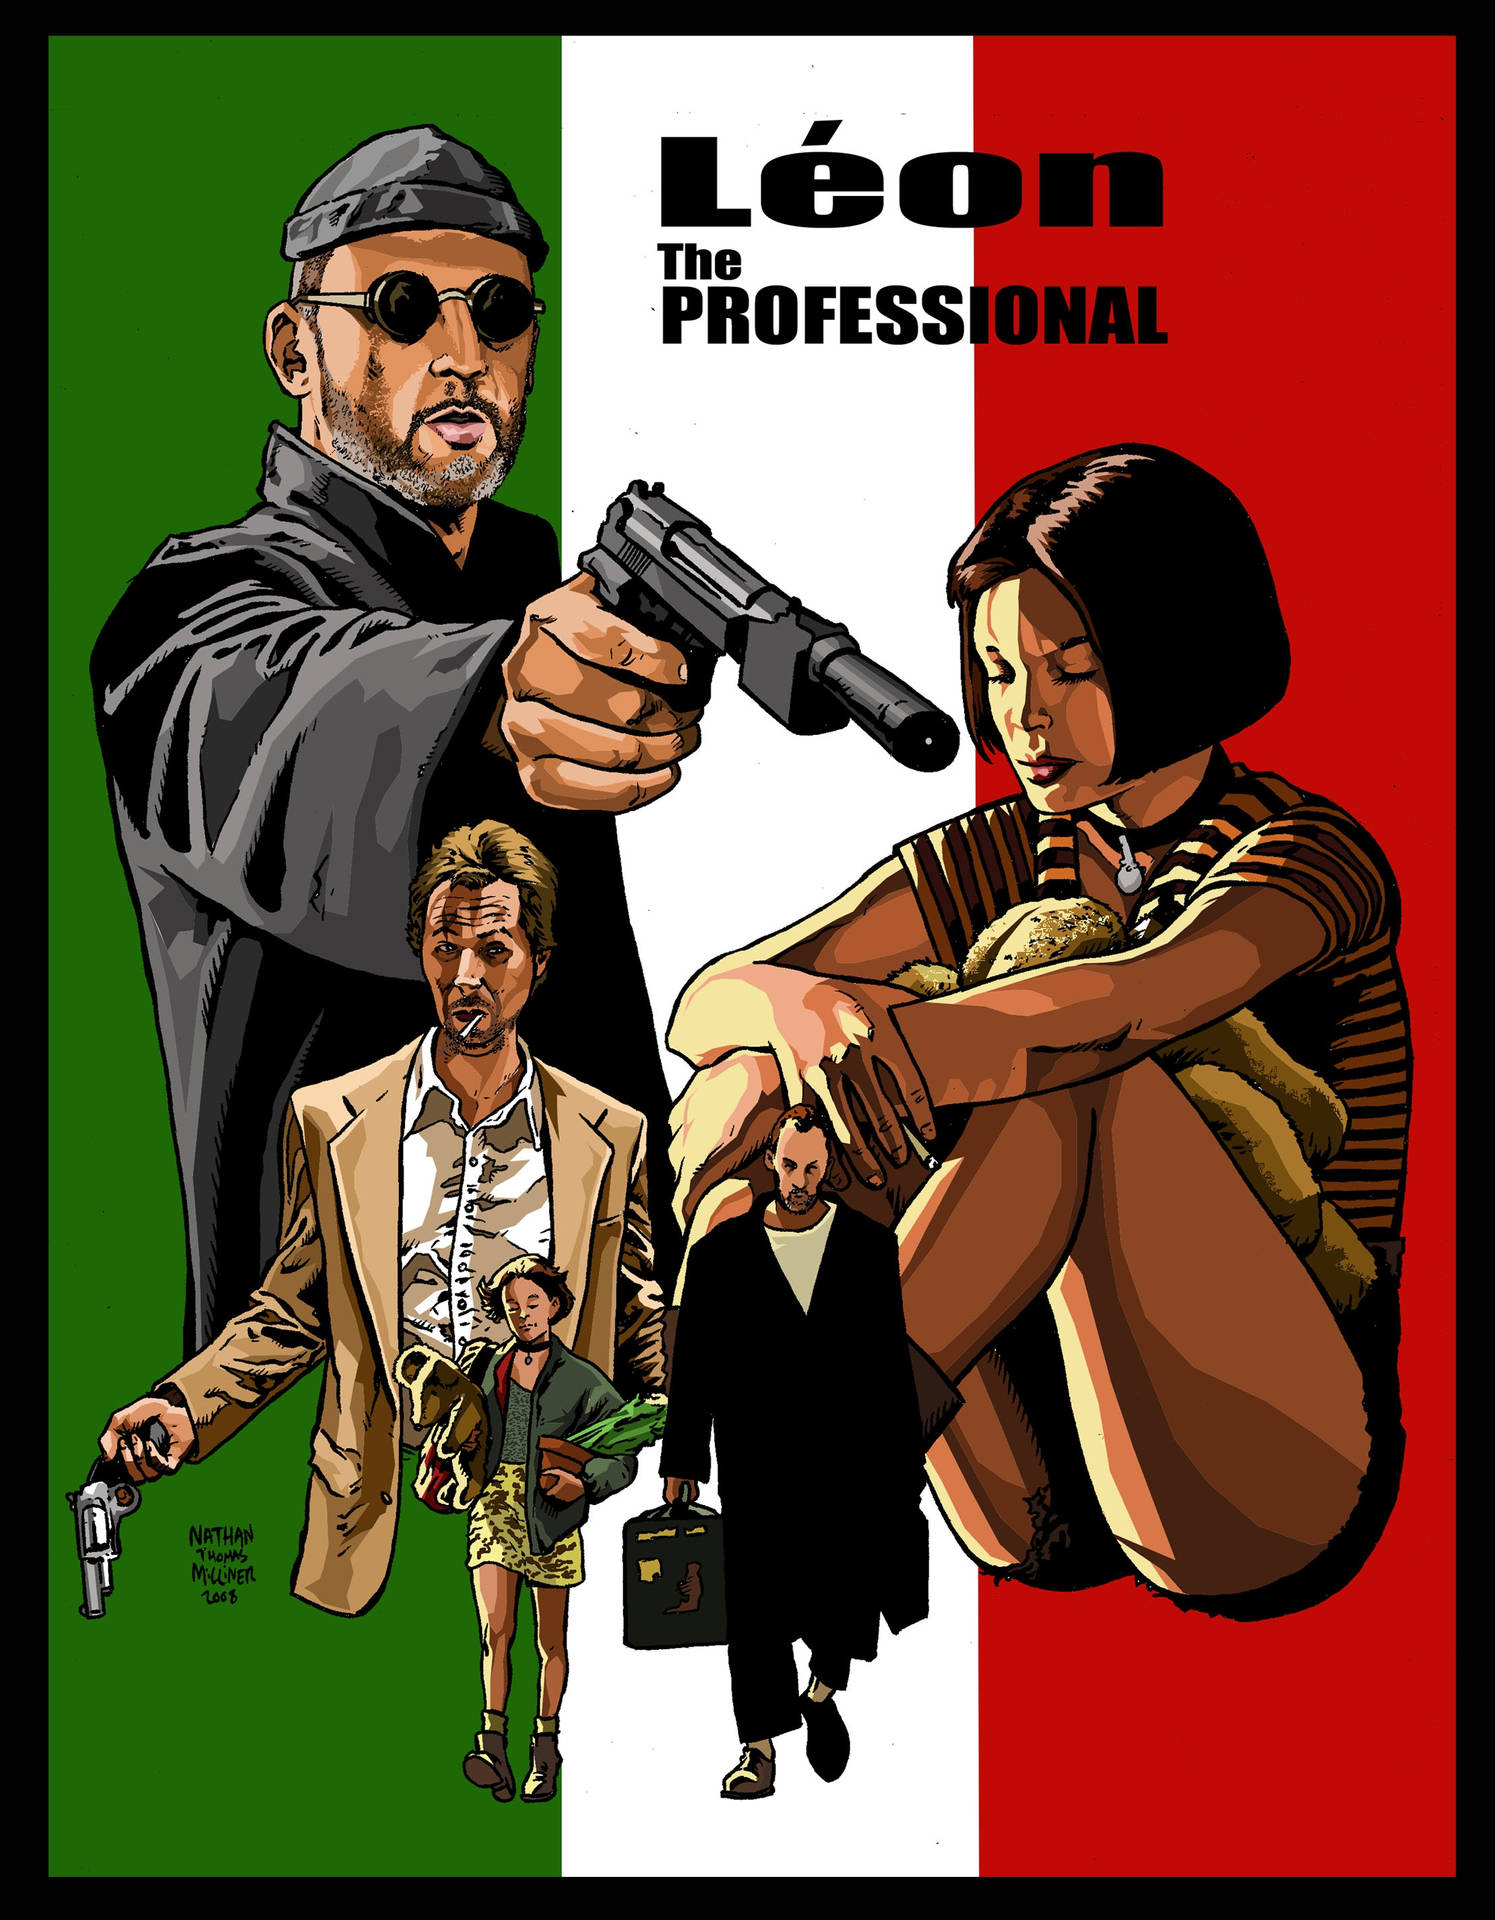 Intense portrait of Jean Reno in the critically acclaimed movie "Leon: The Professional." Wallpaper